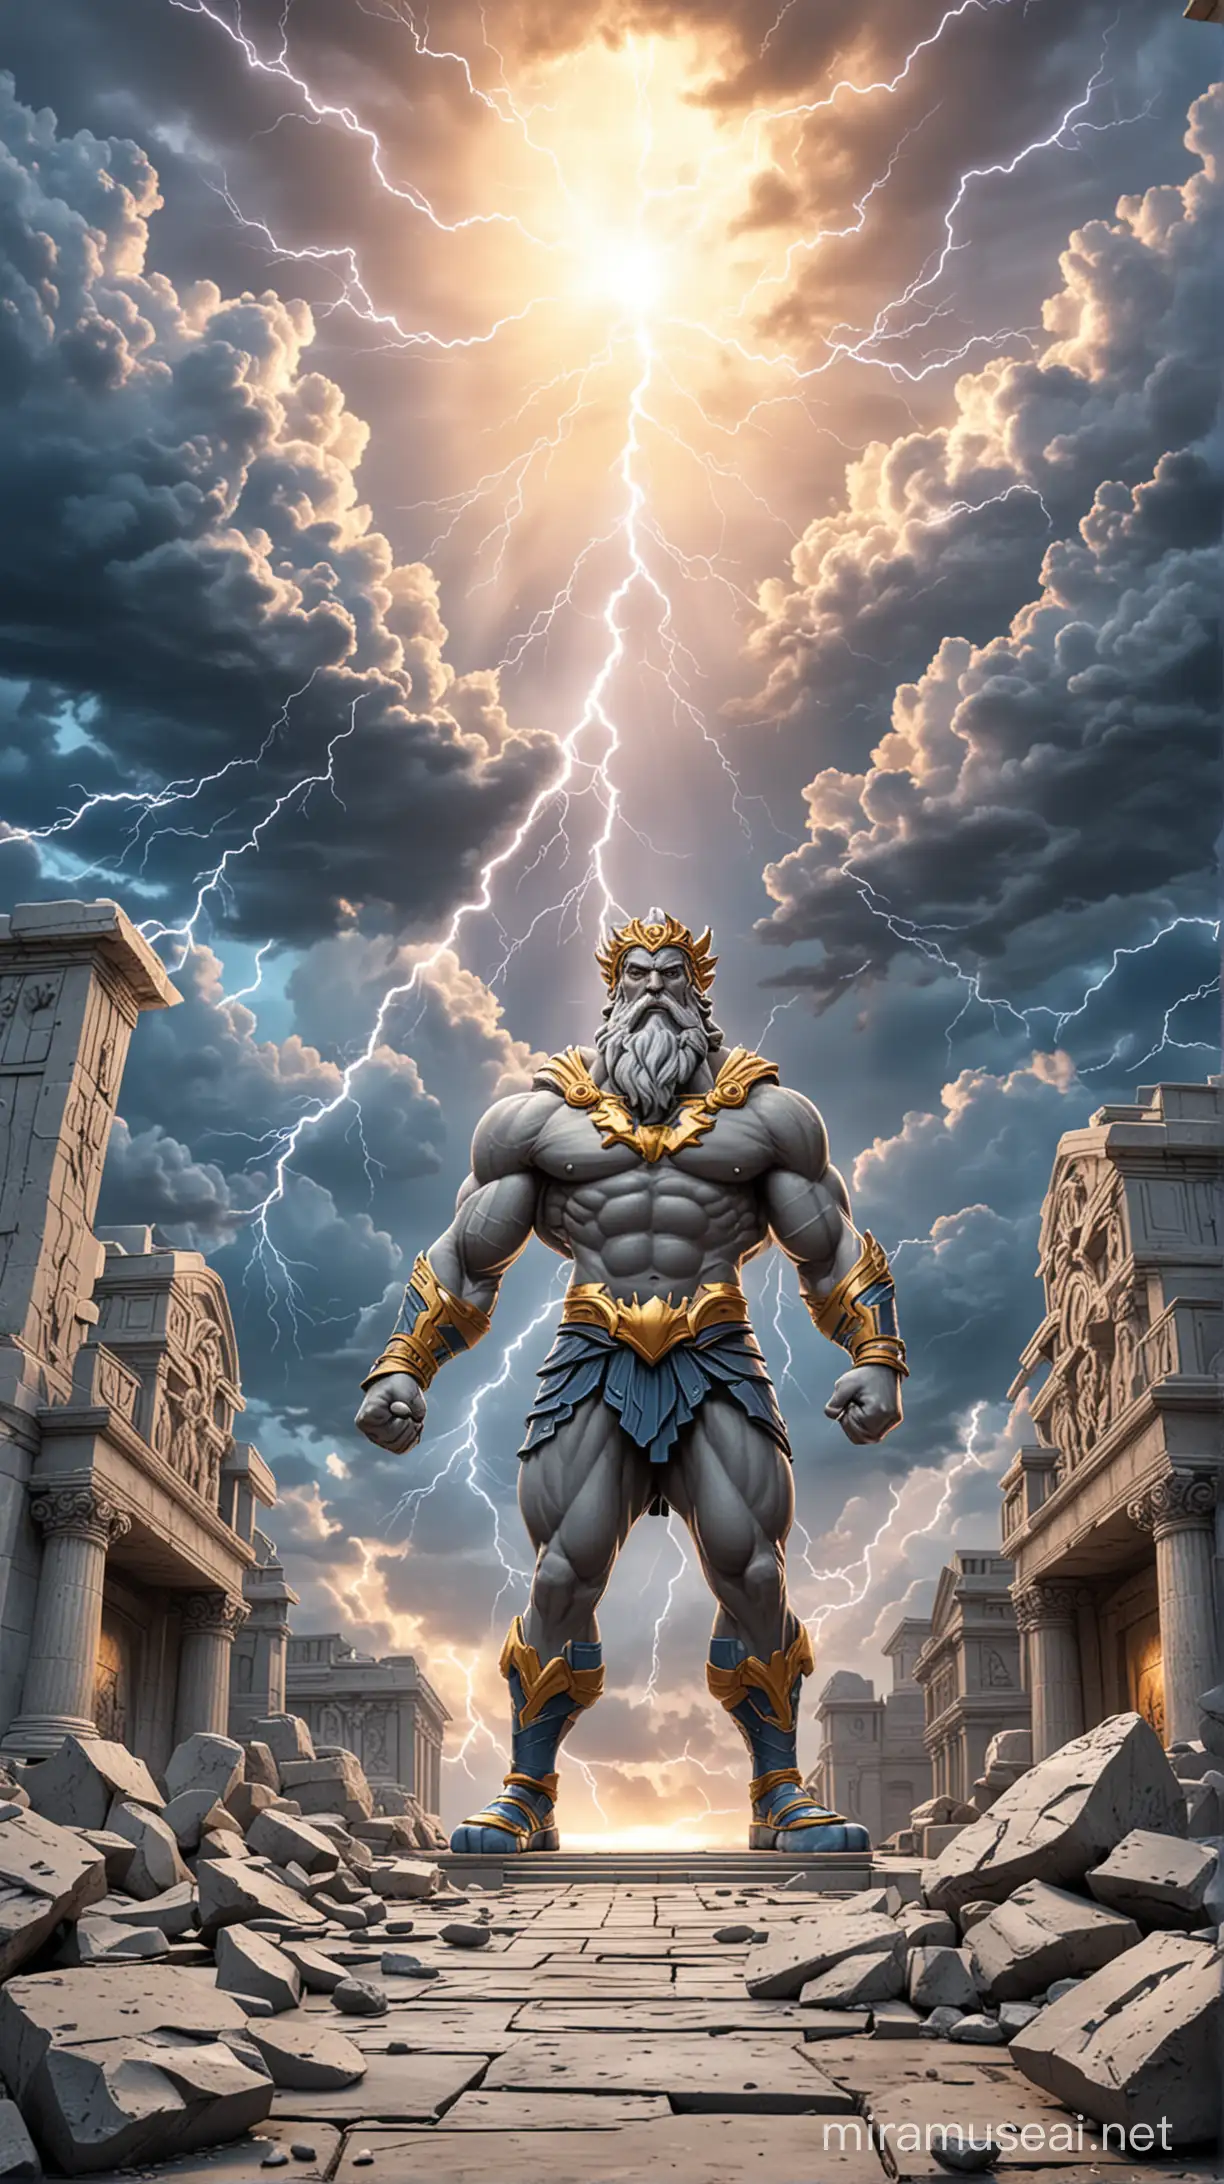 Cartoon Themed Zeus with Beton and Lightning Elements on a Sky Background